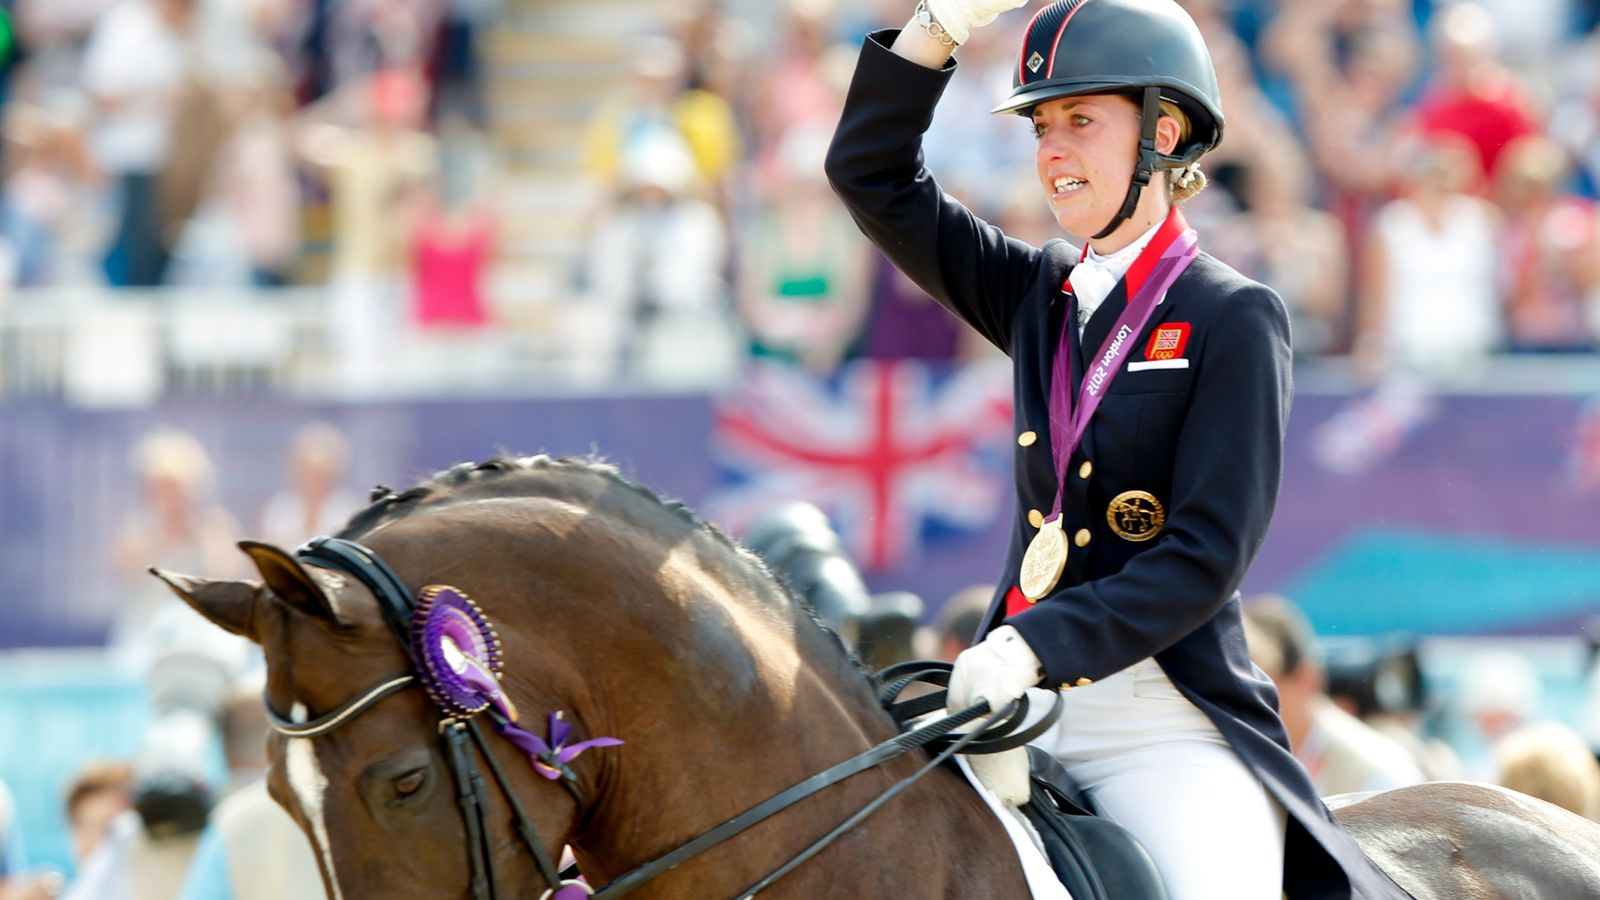 Should dressage be banned in wake of Charlotte Dujardin horse-whipping scandal? Experts weigh in